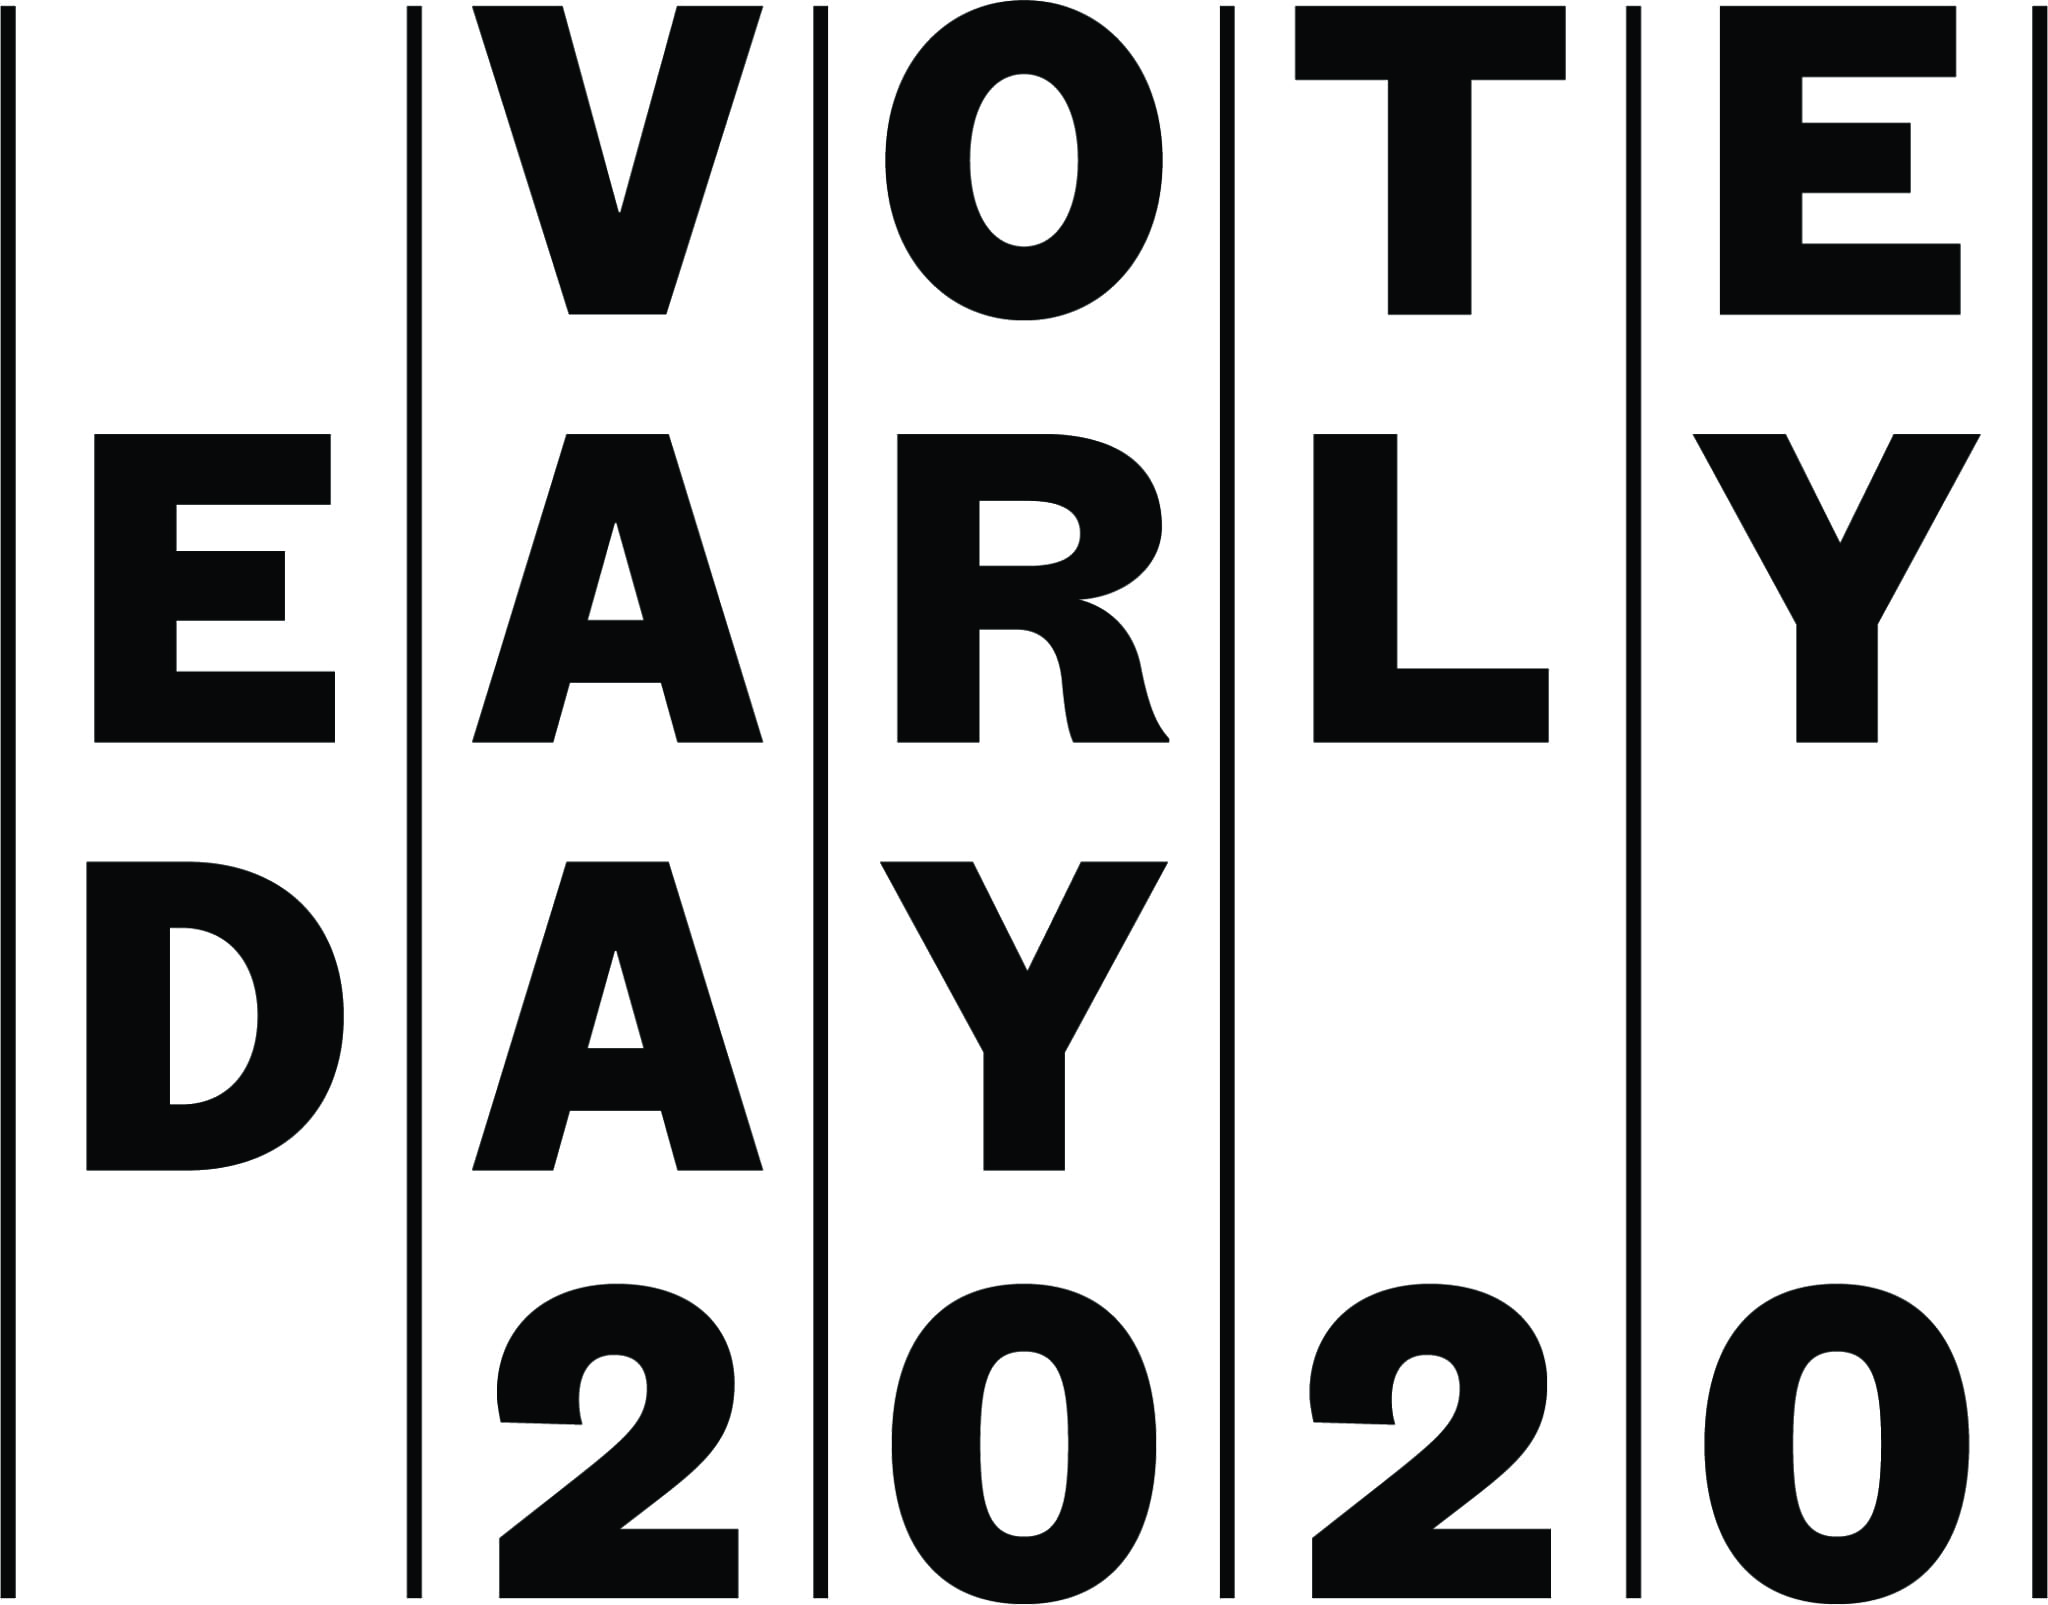 Vote Early Day 2020, October 24 in large black print on a white background